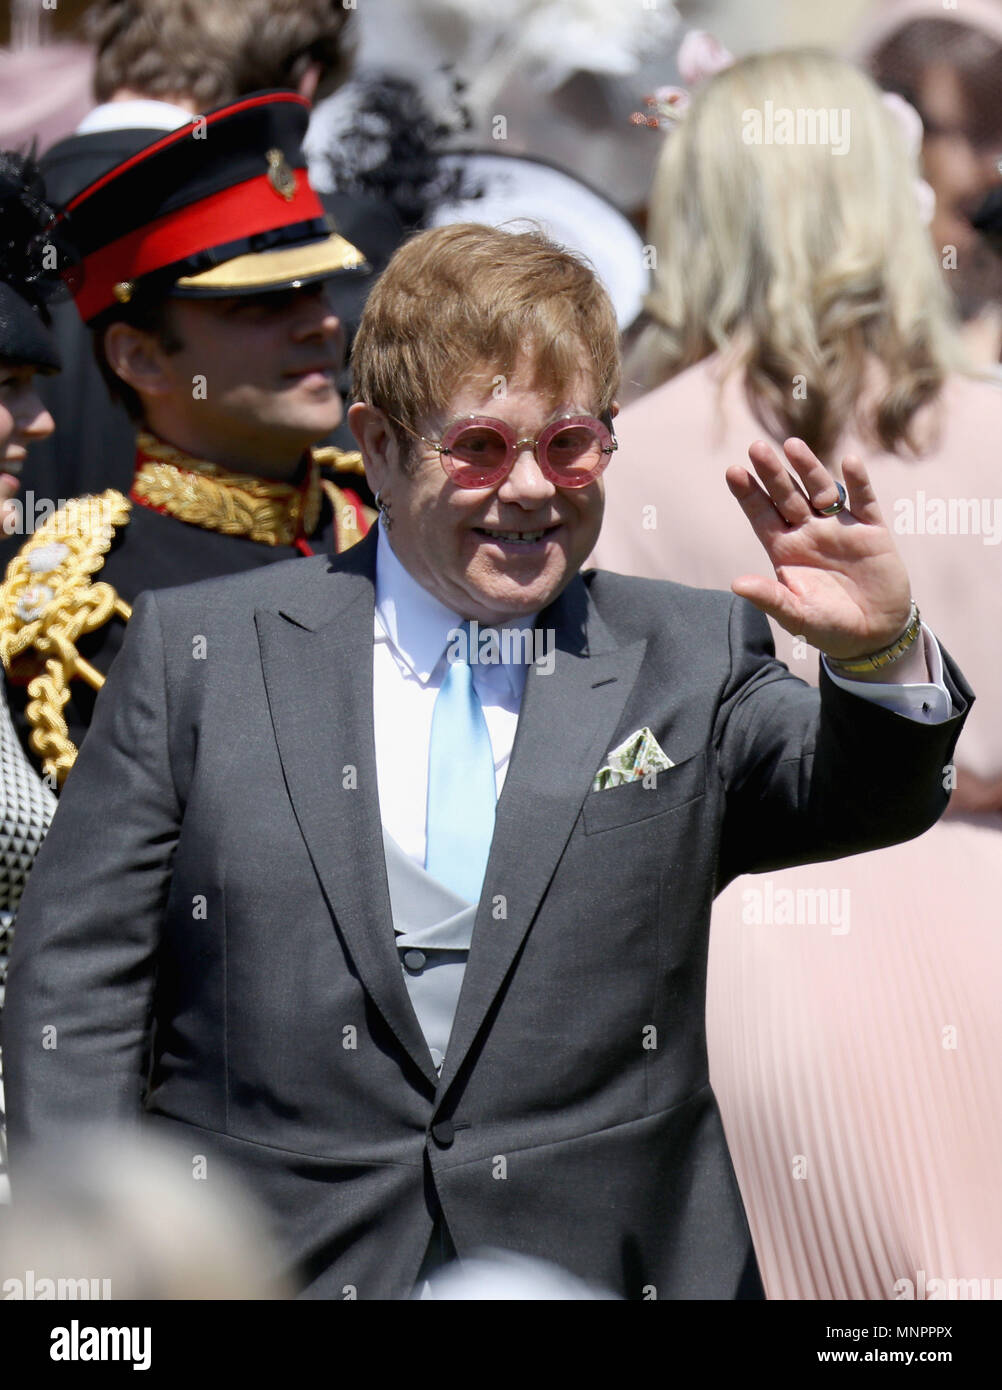 WINDSOR, ENGLAND - MAY 19: Sir Elton John arrives at the wedding of Prince Harry to Ms Meghan Markle at St George's Chapel, Windsor Castle on May 19, 2018 in Windsor, England. Prince Henry Charles Albert David of Wales marries Ms. Meghan Markle in a service at St George's Chapel inside the grounds of Windsor Castle. Among the guests were 2200 members of the public, the royal family and Ms. Markle's Mother Doria Ragland. (Photo by Chris Jackson/Getty Images) Stock Photo